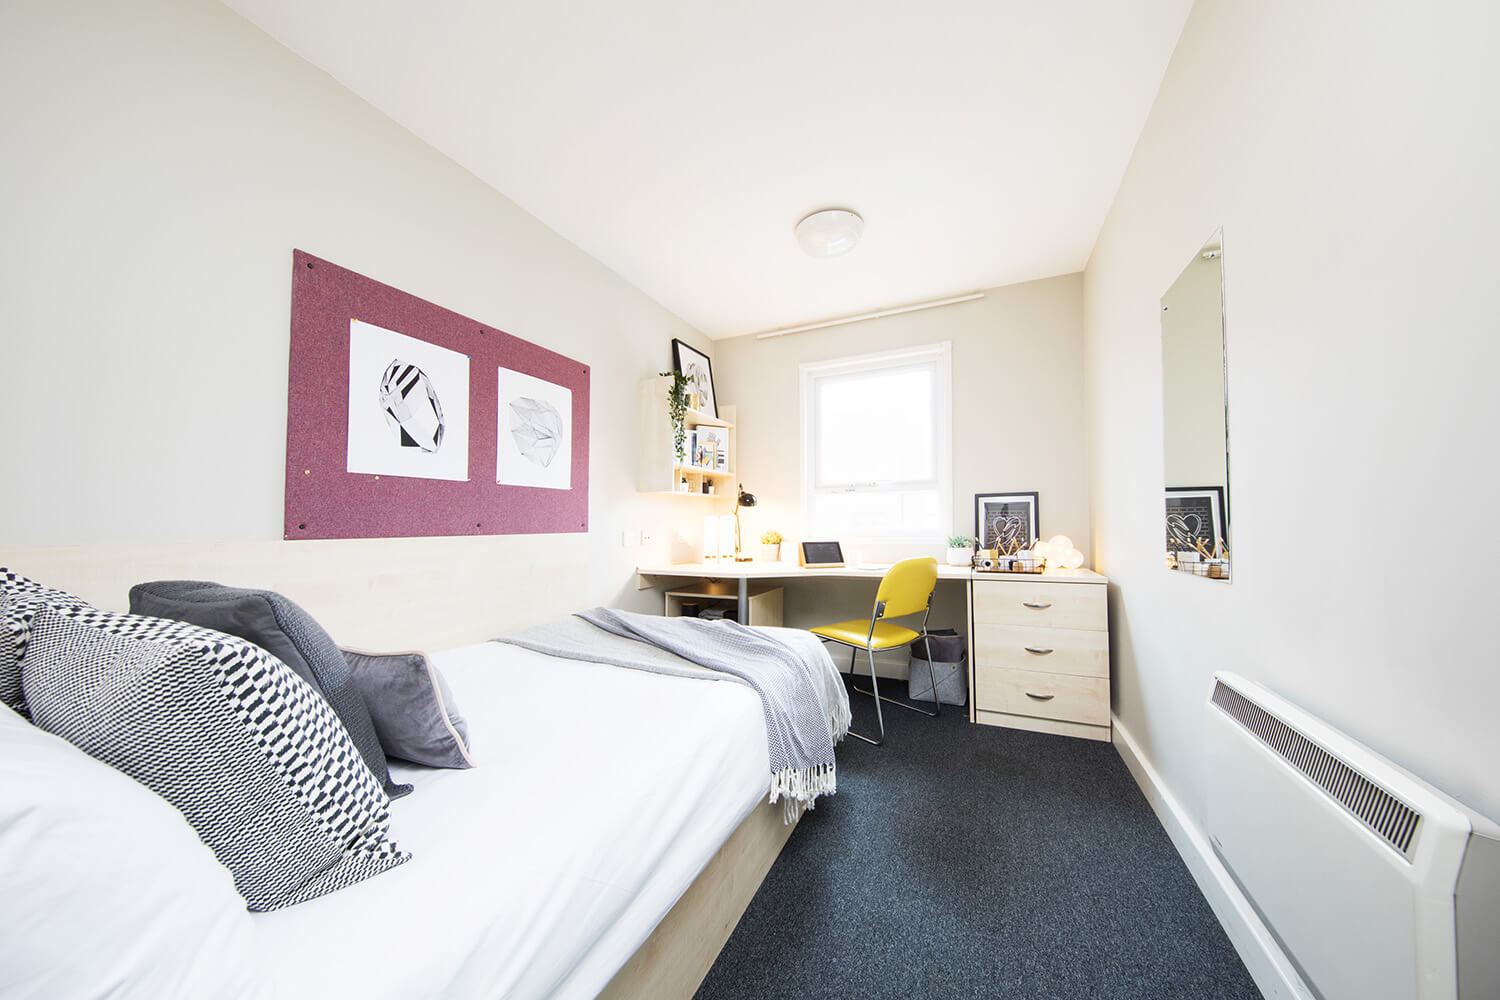 Bed and study space in an en-suite room at Raglan House student accommodation in Coventry